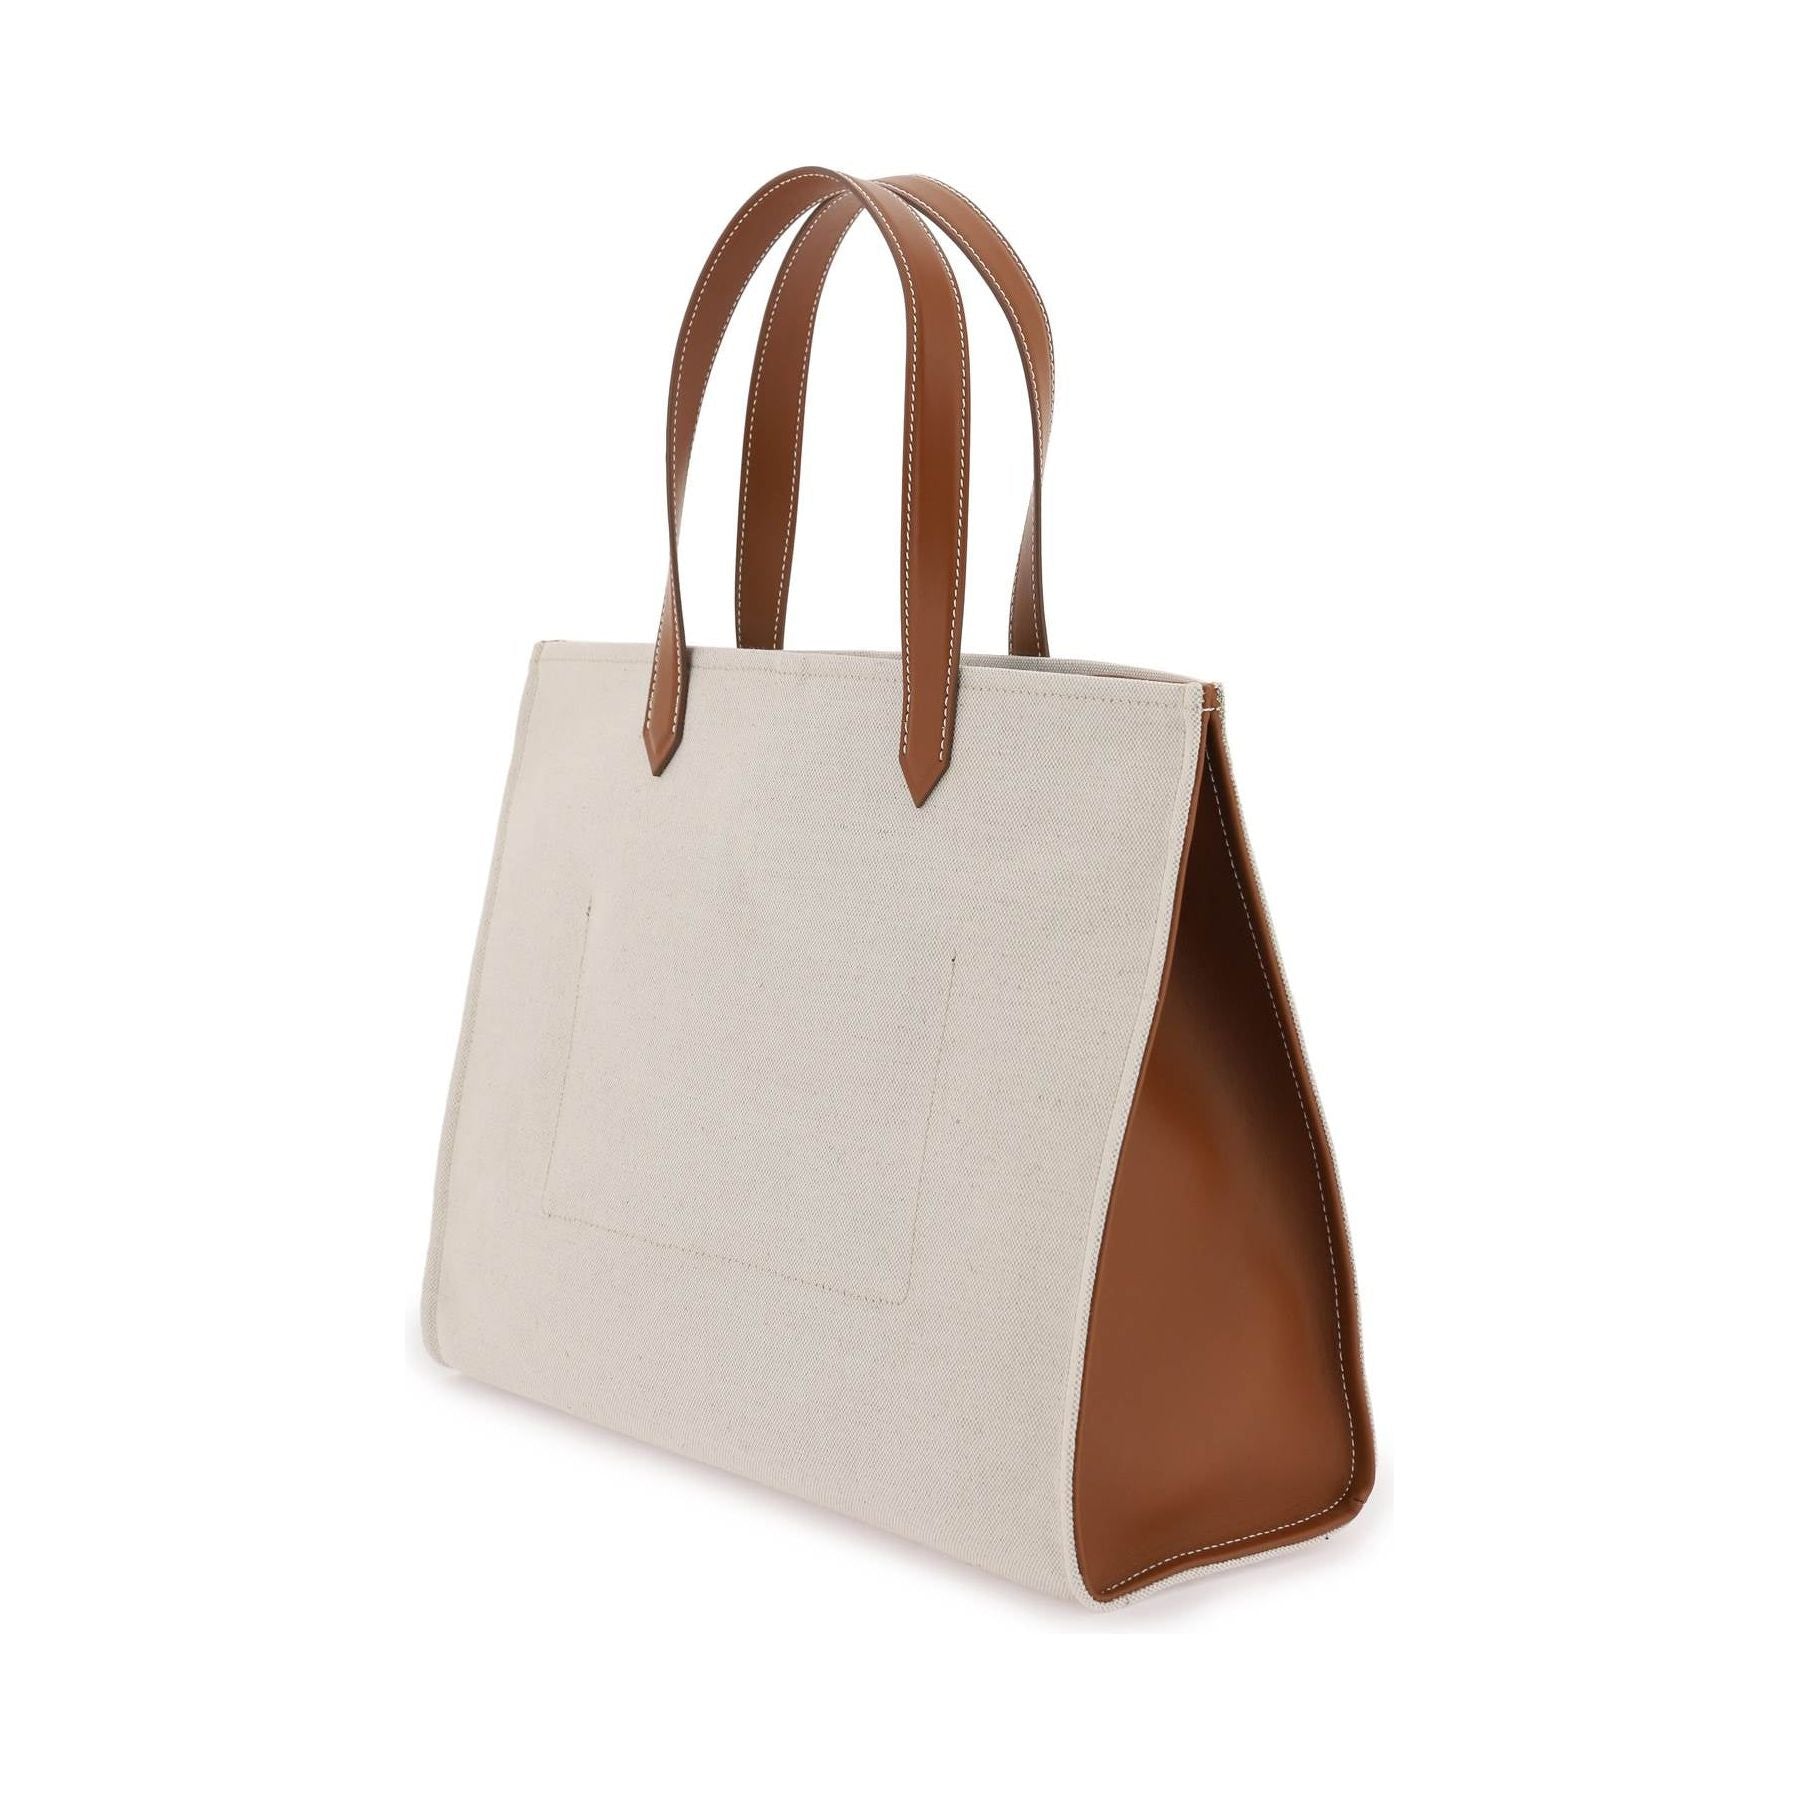 B-Army 42 Canvas and Smooth Leather Tote Bag